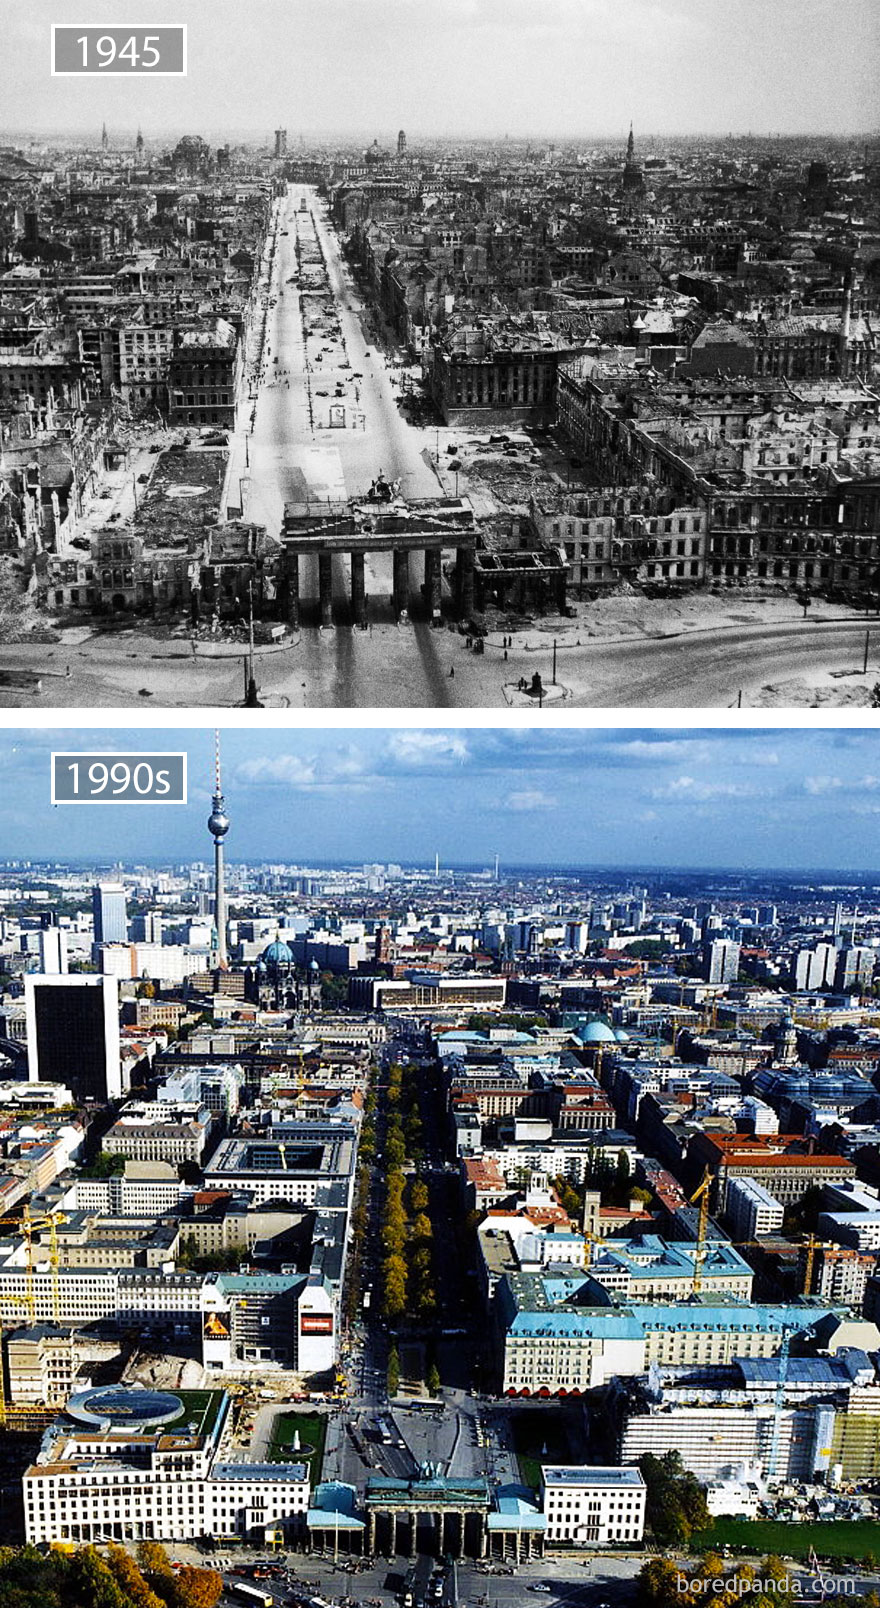 Berlin, Germany - 1945 And 1990s